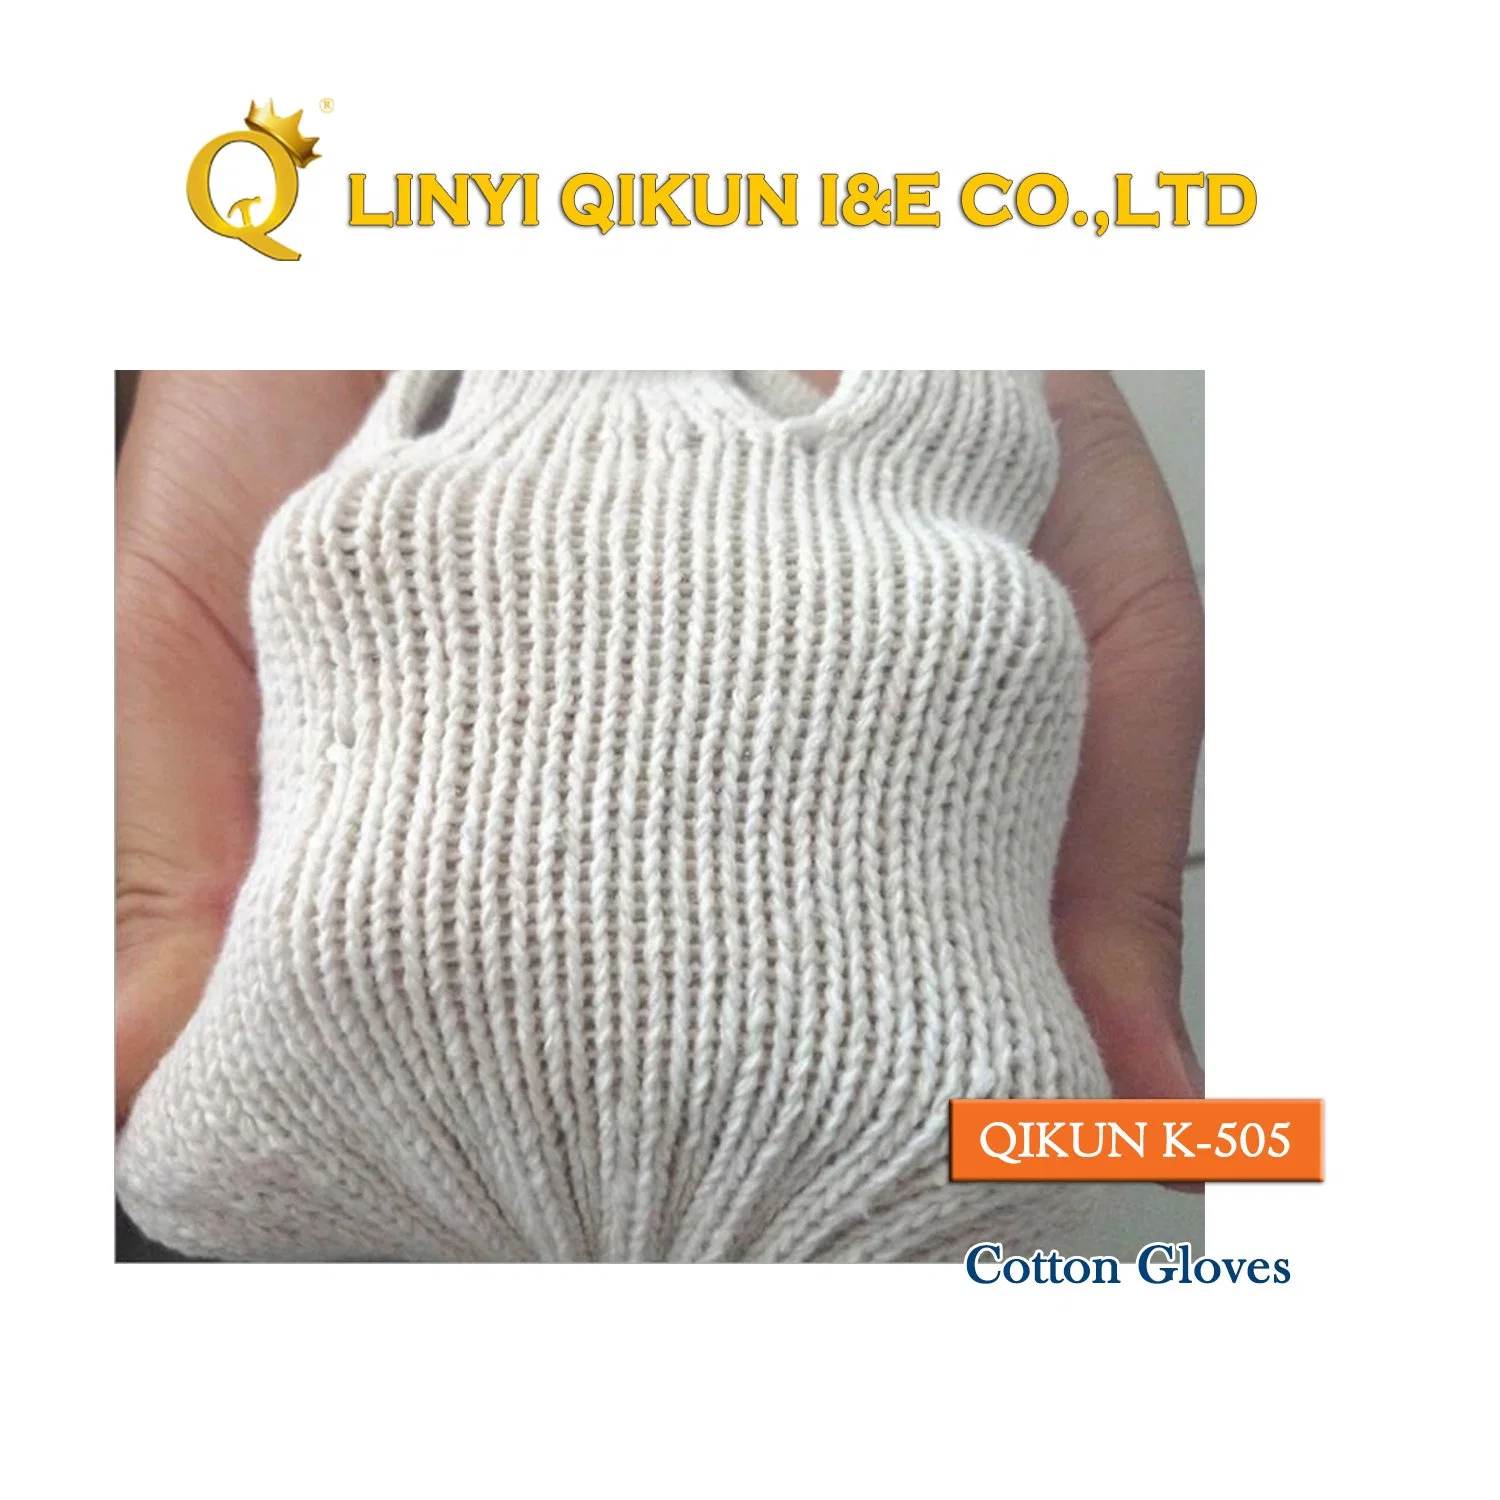 K-503 7 Gauge Knitted Working Cotton Nitrile Latex Industrial Safety Labor Protect Glove